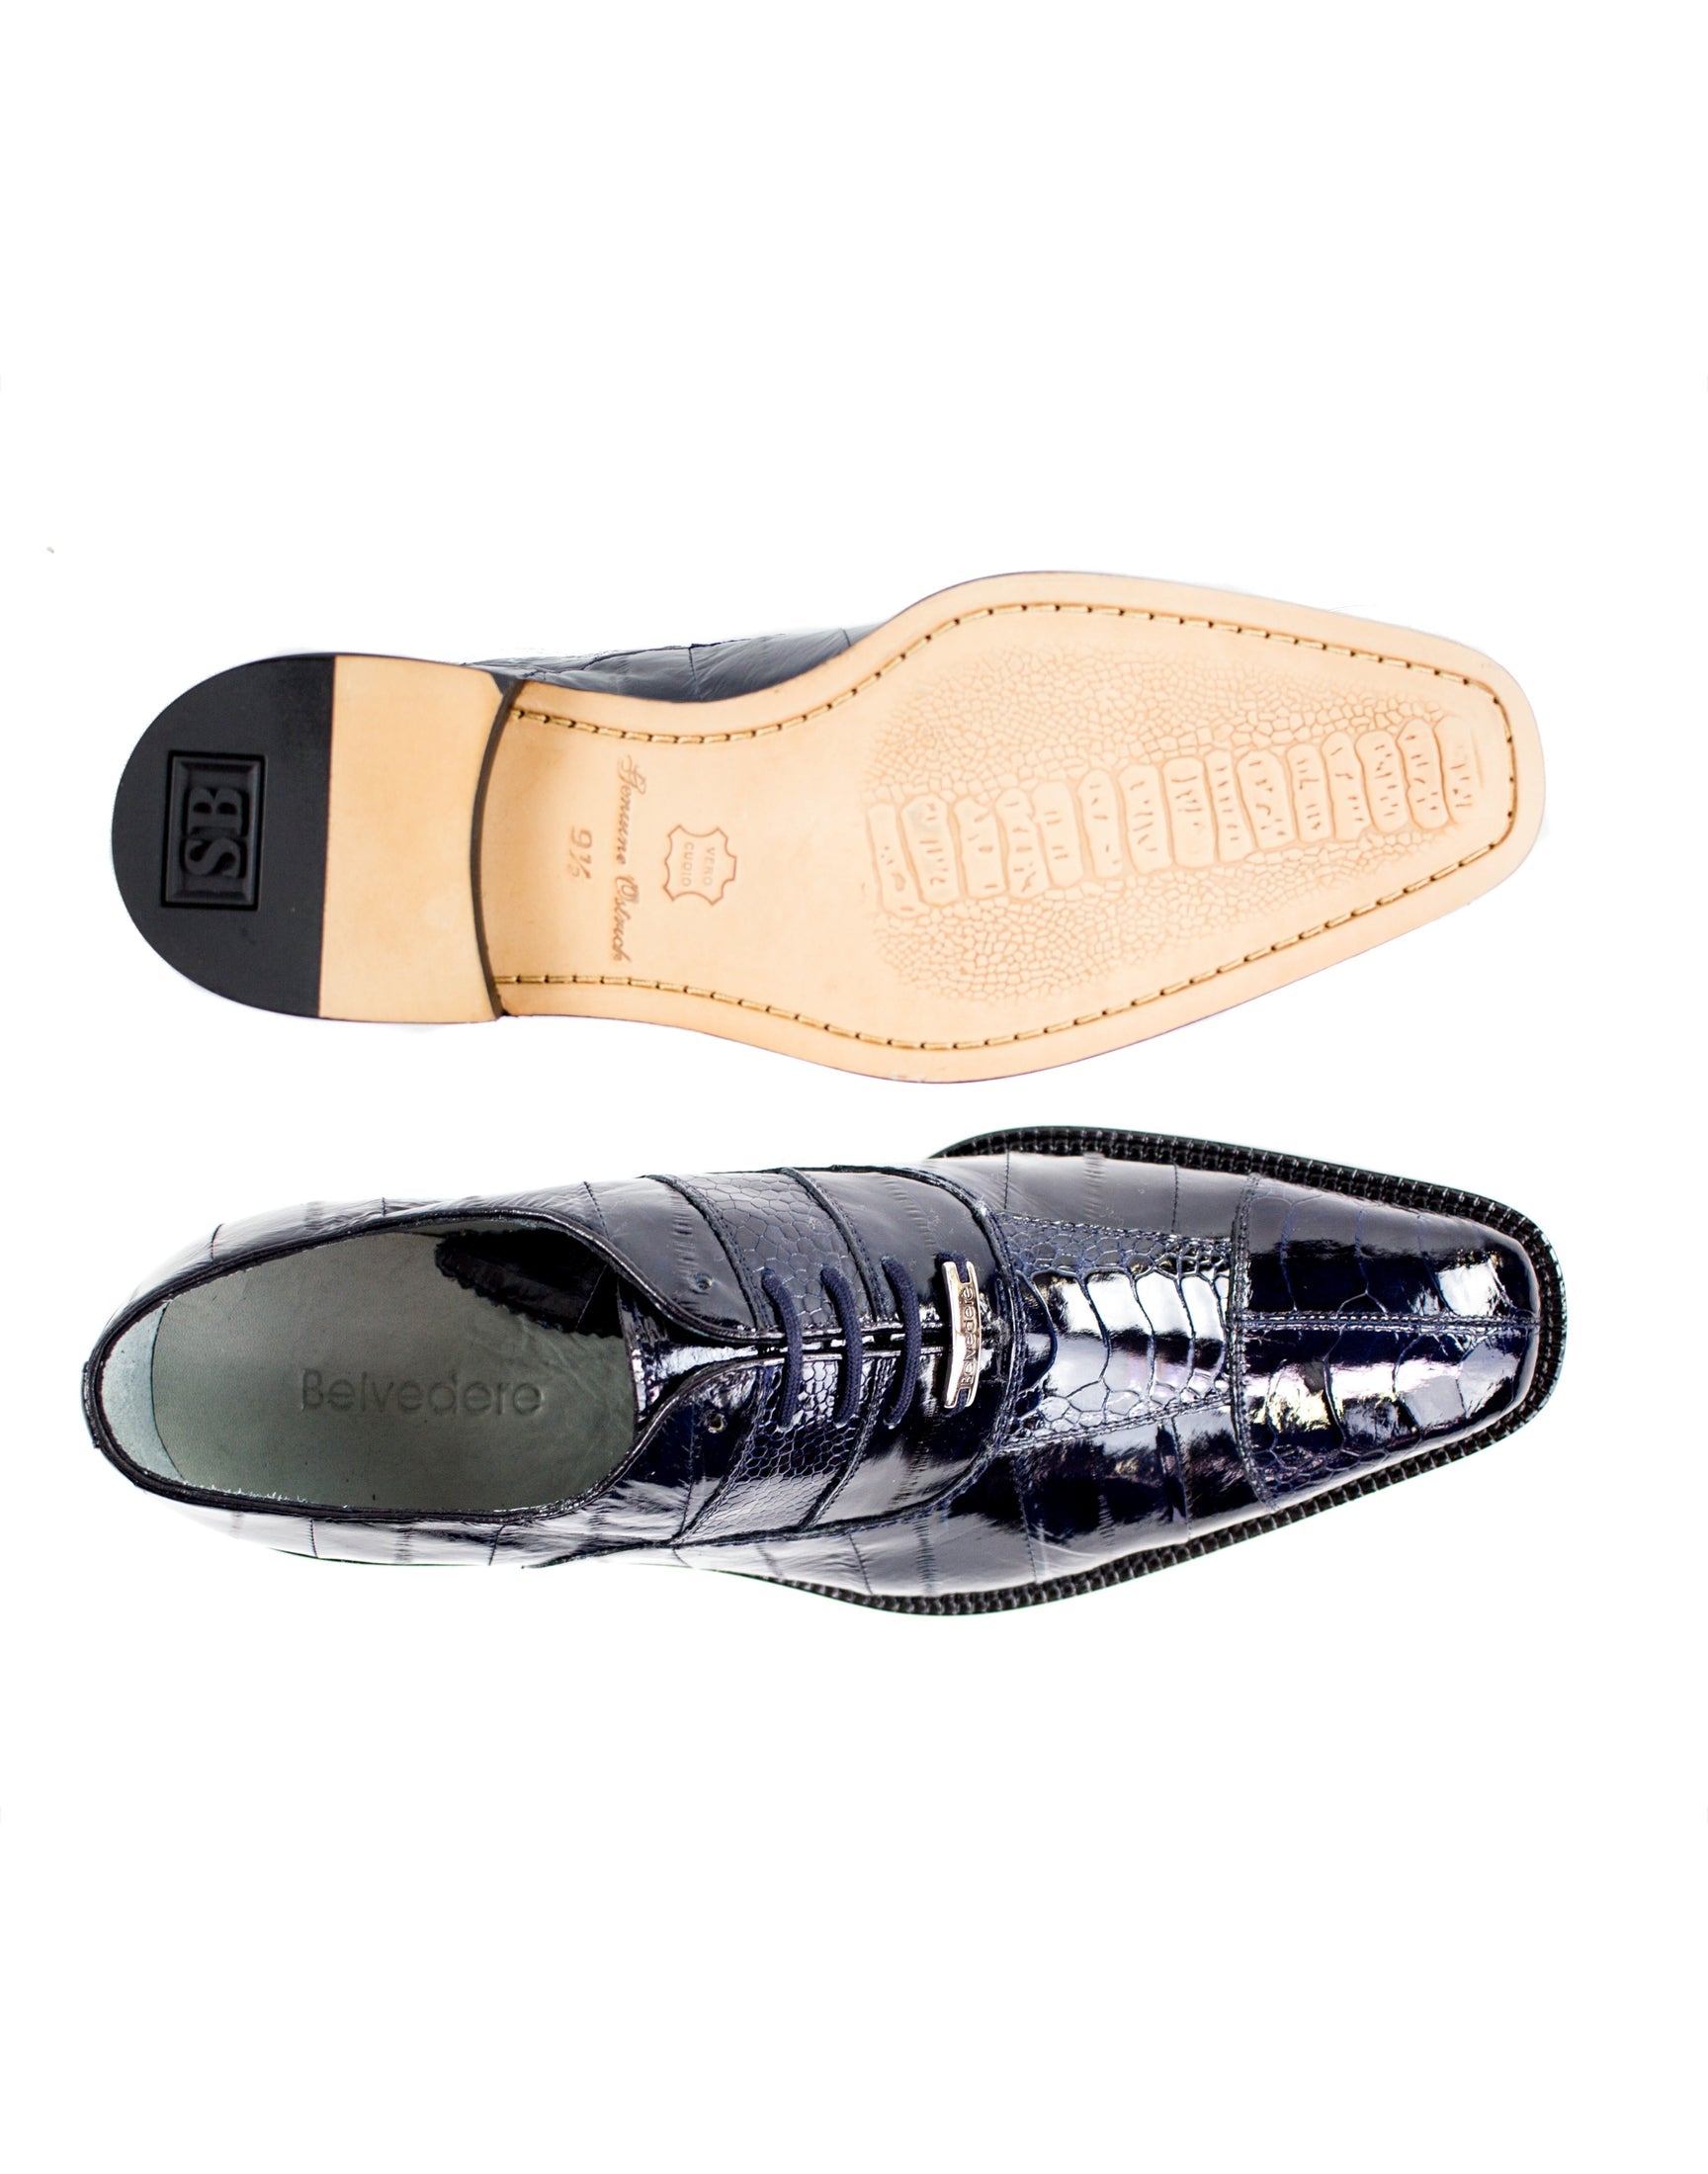 Belvedere Shoes Mare - Navy